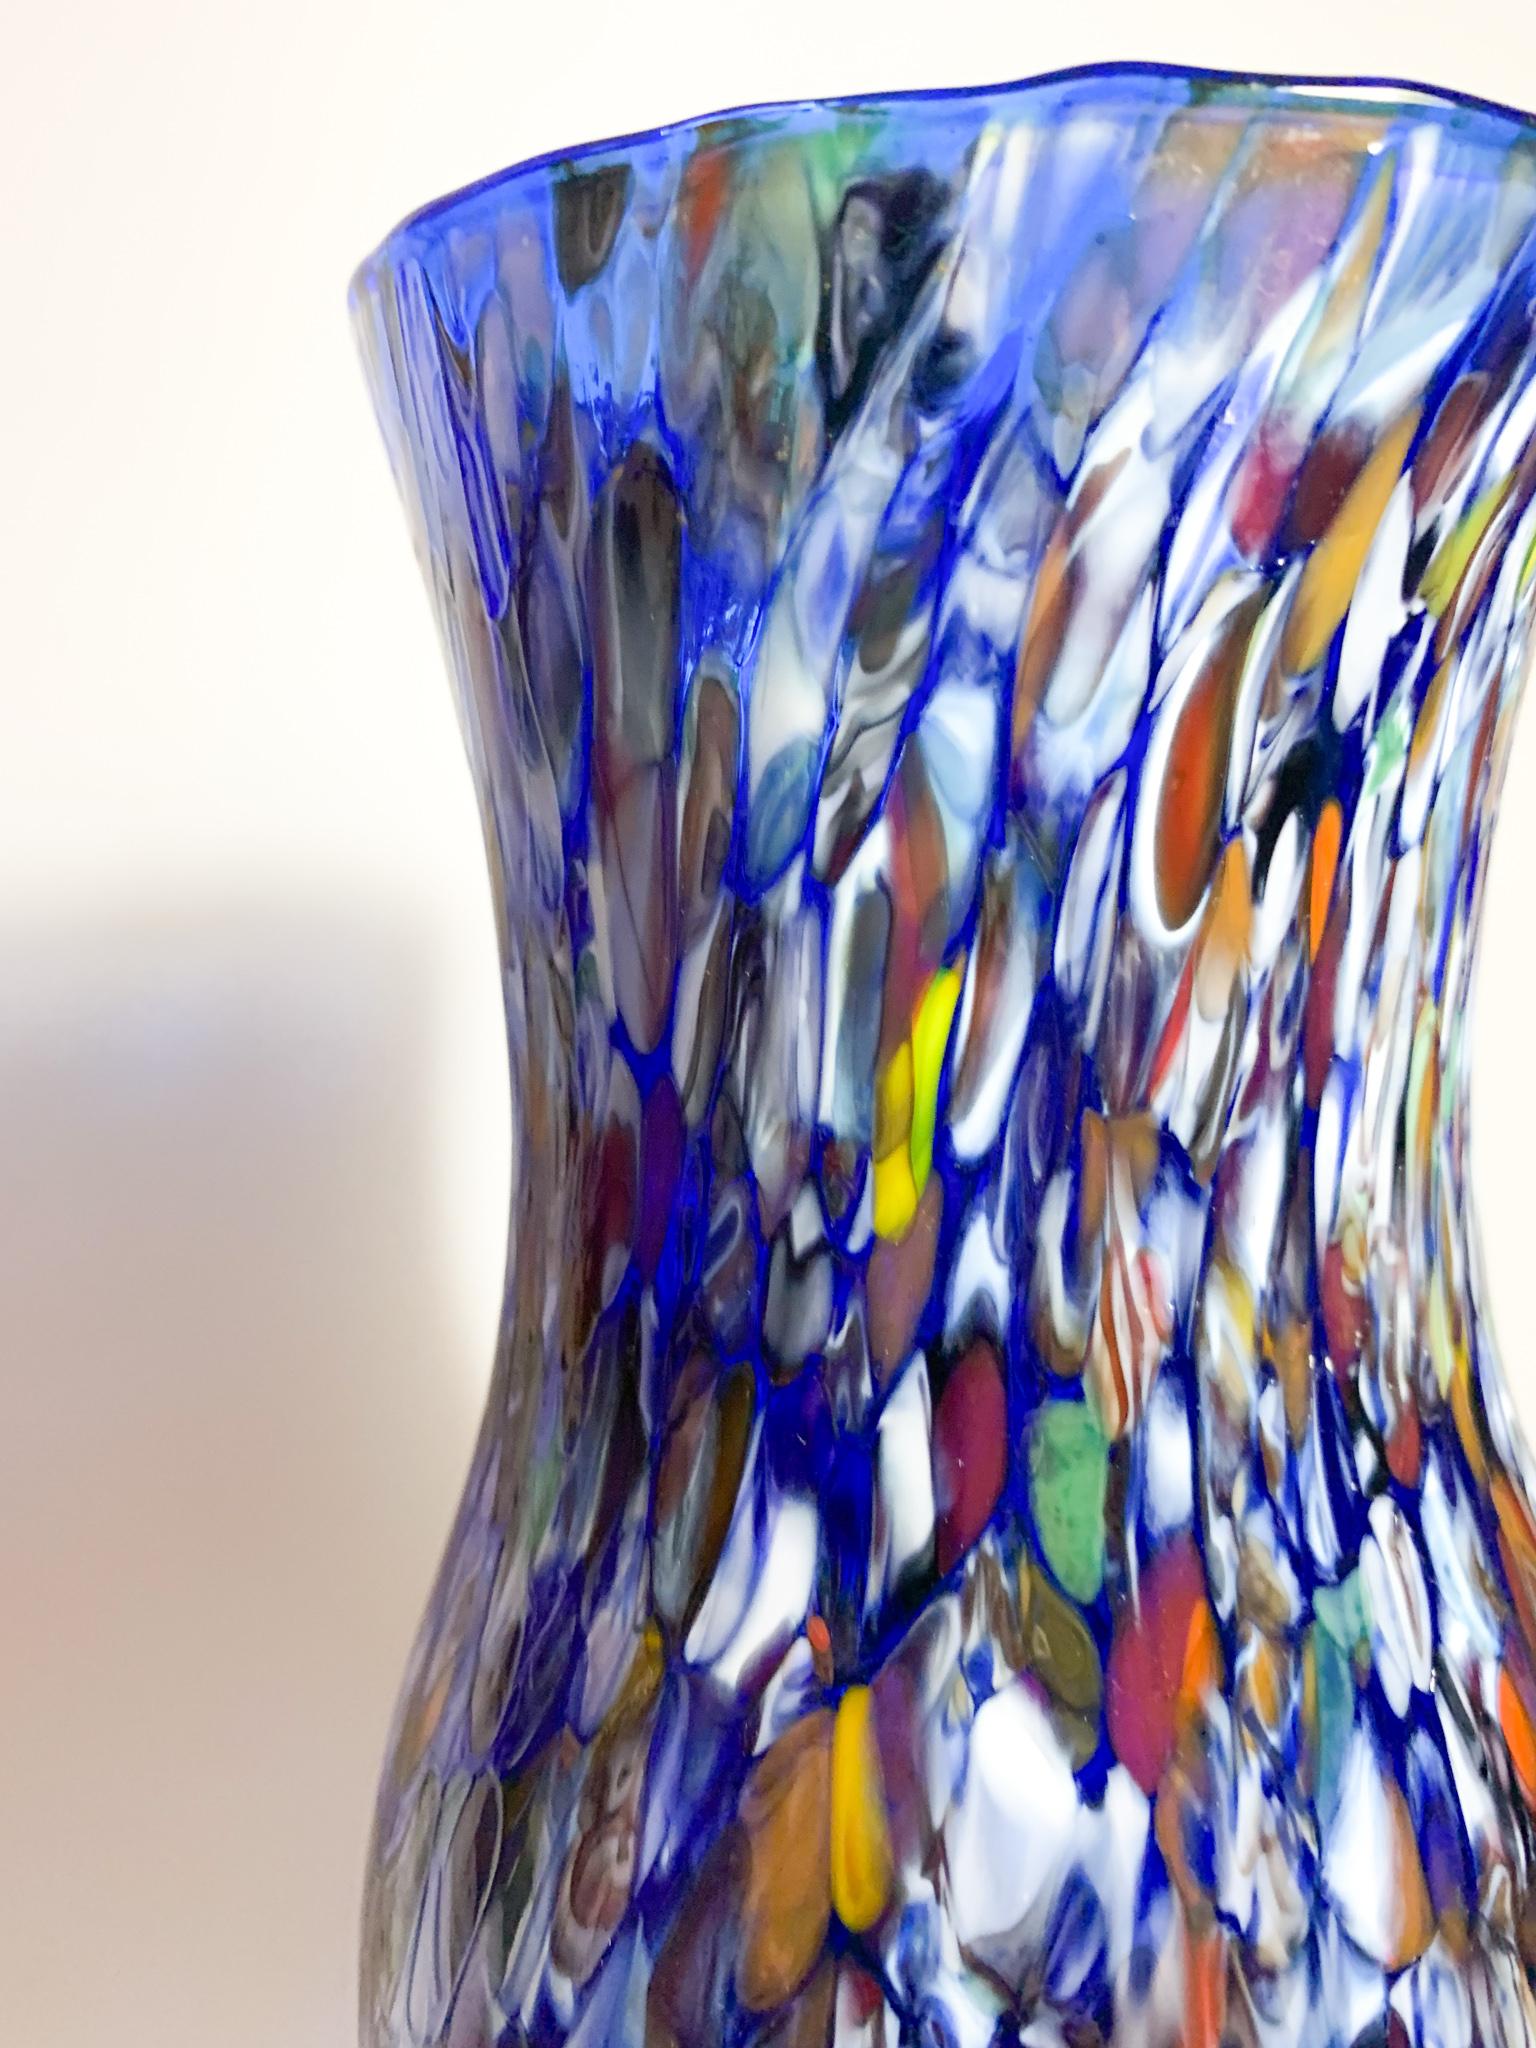 Mid-20th Century Italian Vase in Blue Murano Glass with Murrine by Fratelli Toso from the 1940s